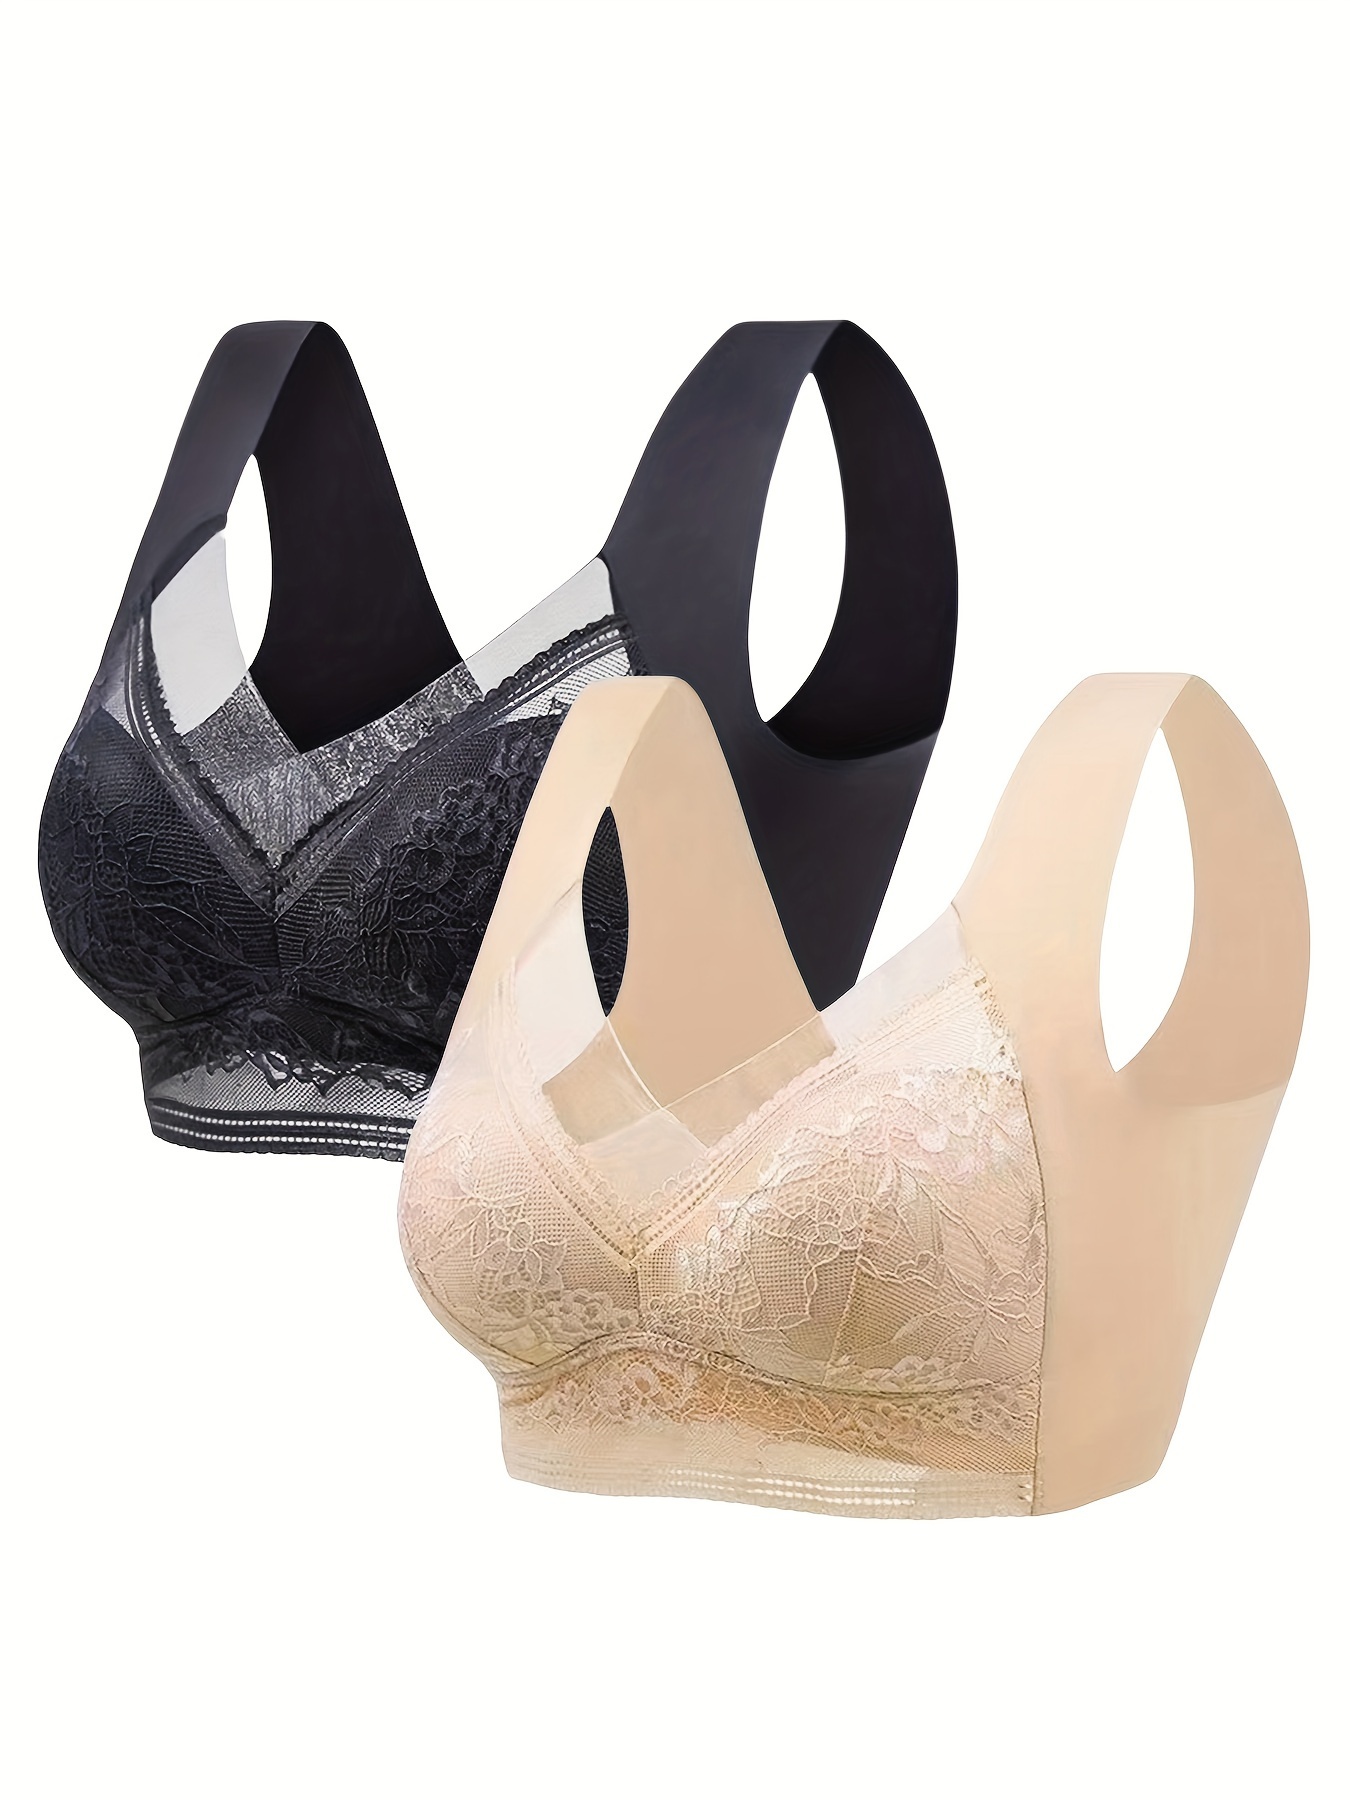 3Pcs Breathable Hollow Out Grid Sports Wireless Vest Bra Seamless